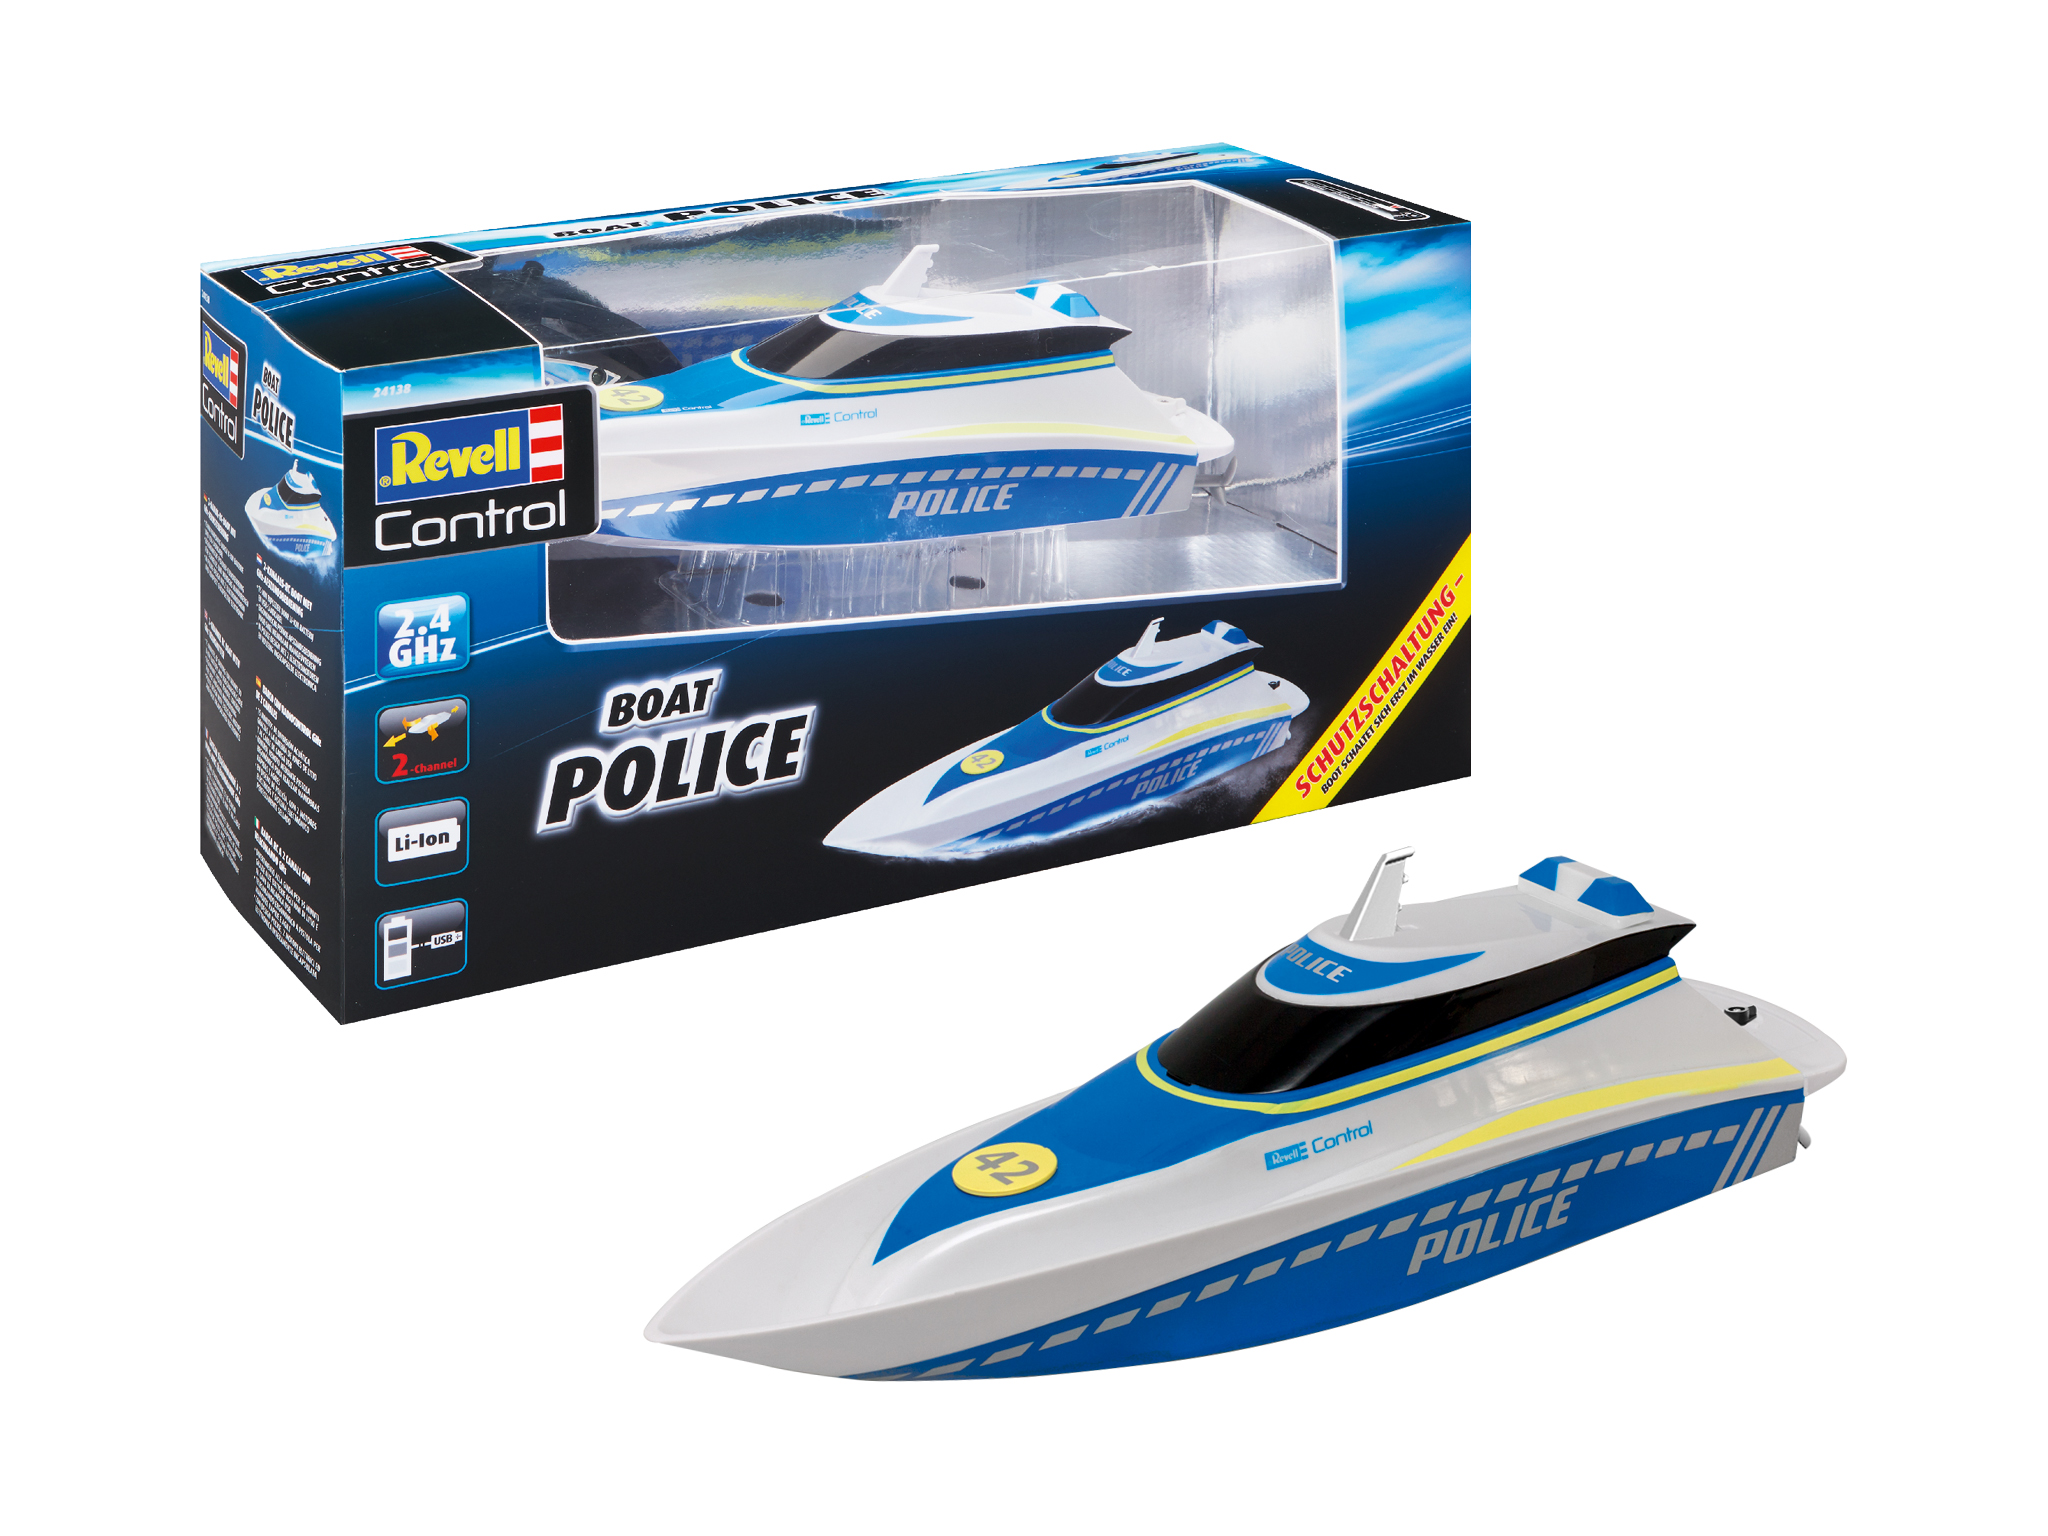 Revell Control Police afstandbestuurbare boot 2.4Ghz